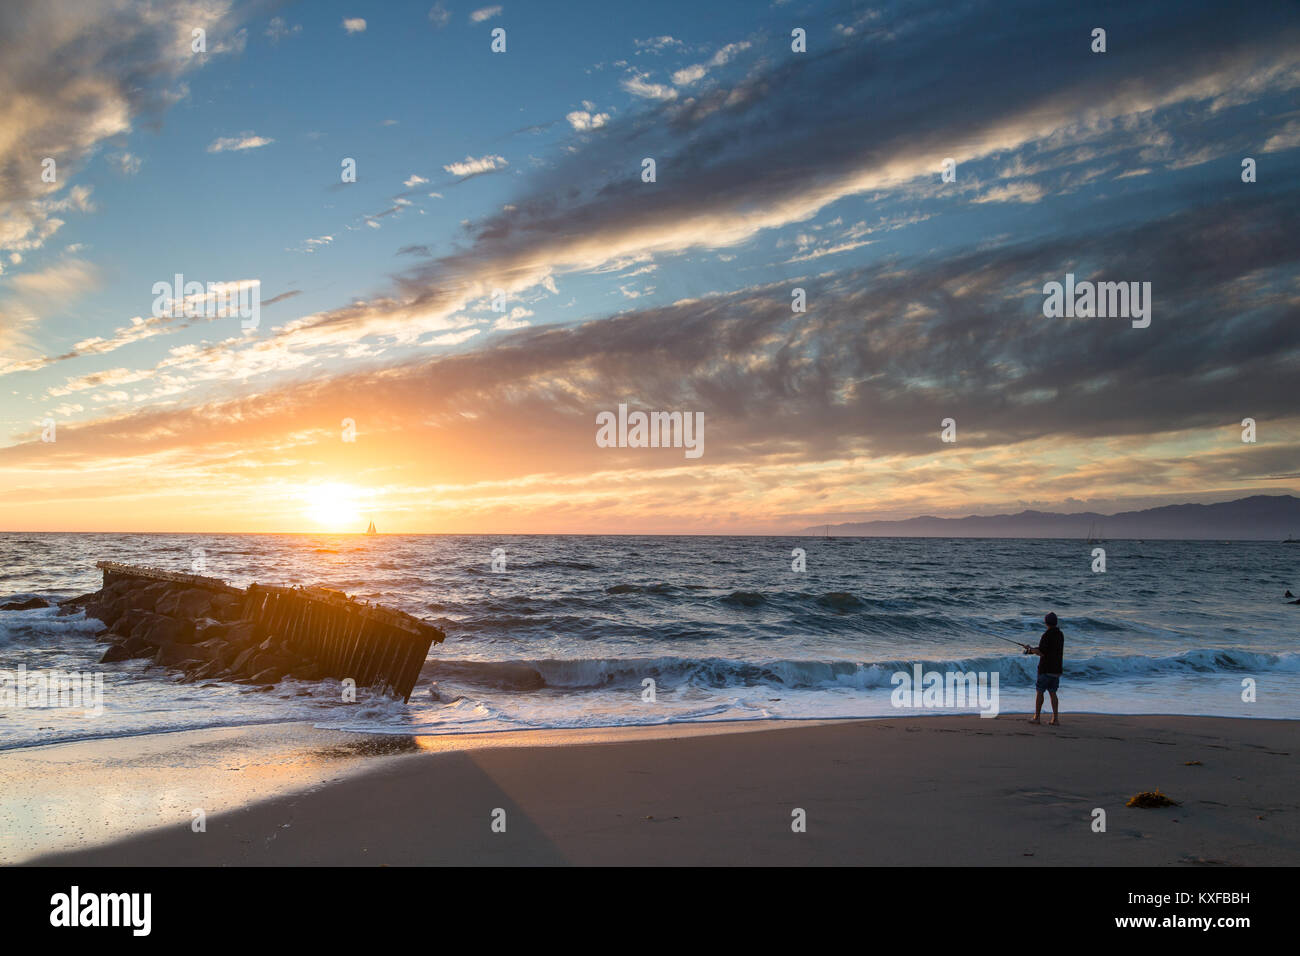 A fisherman fishes for perch from the beach at sunset in Playa Del Rey, California. Stock Photo